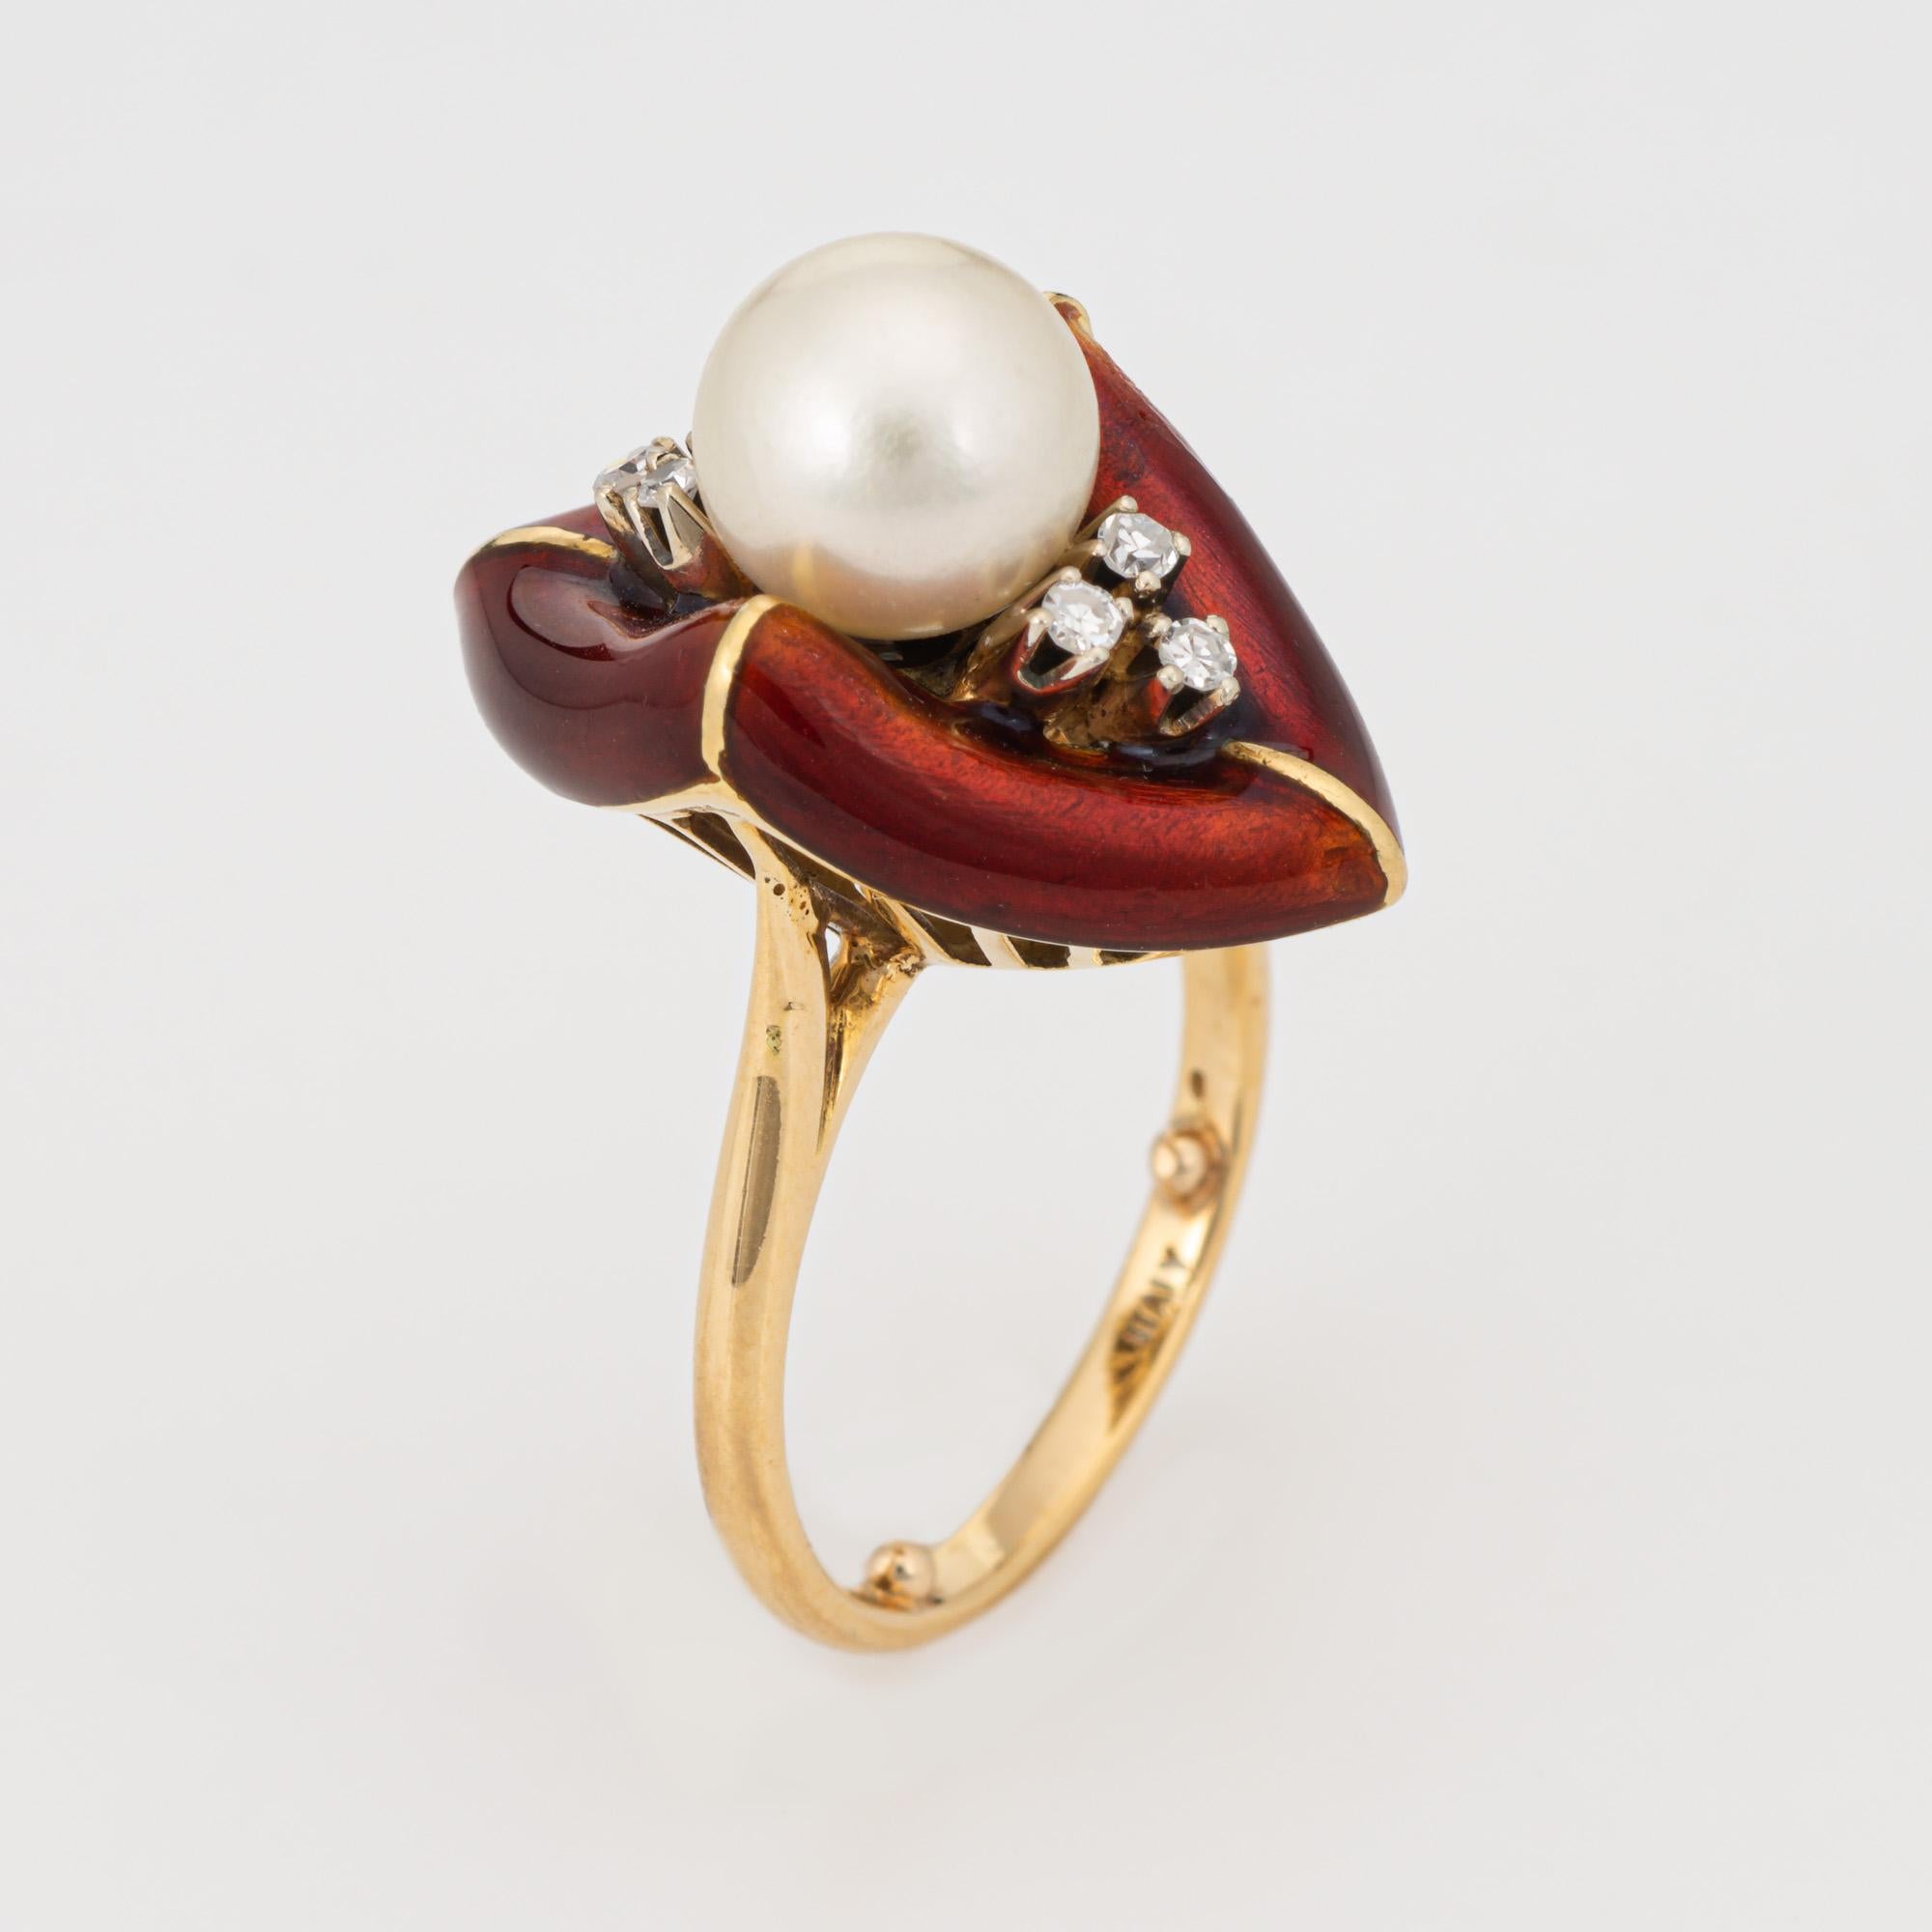 Stylish abstract diamond and cultured pearl cocktail ring crafted in 18k yellow gold (circa 1970s). 

Cultured pearl measures 7.5mm. Six single cut diamonds total an estimated 0.06 carats (estimated at H-I color and SI1-I1 clarity). Note: slight